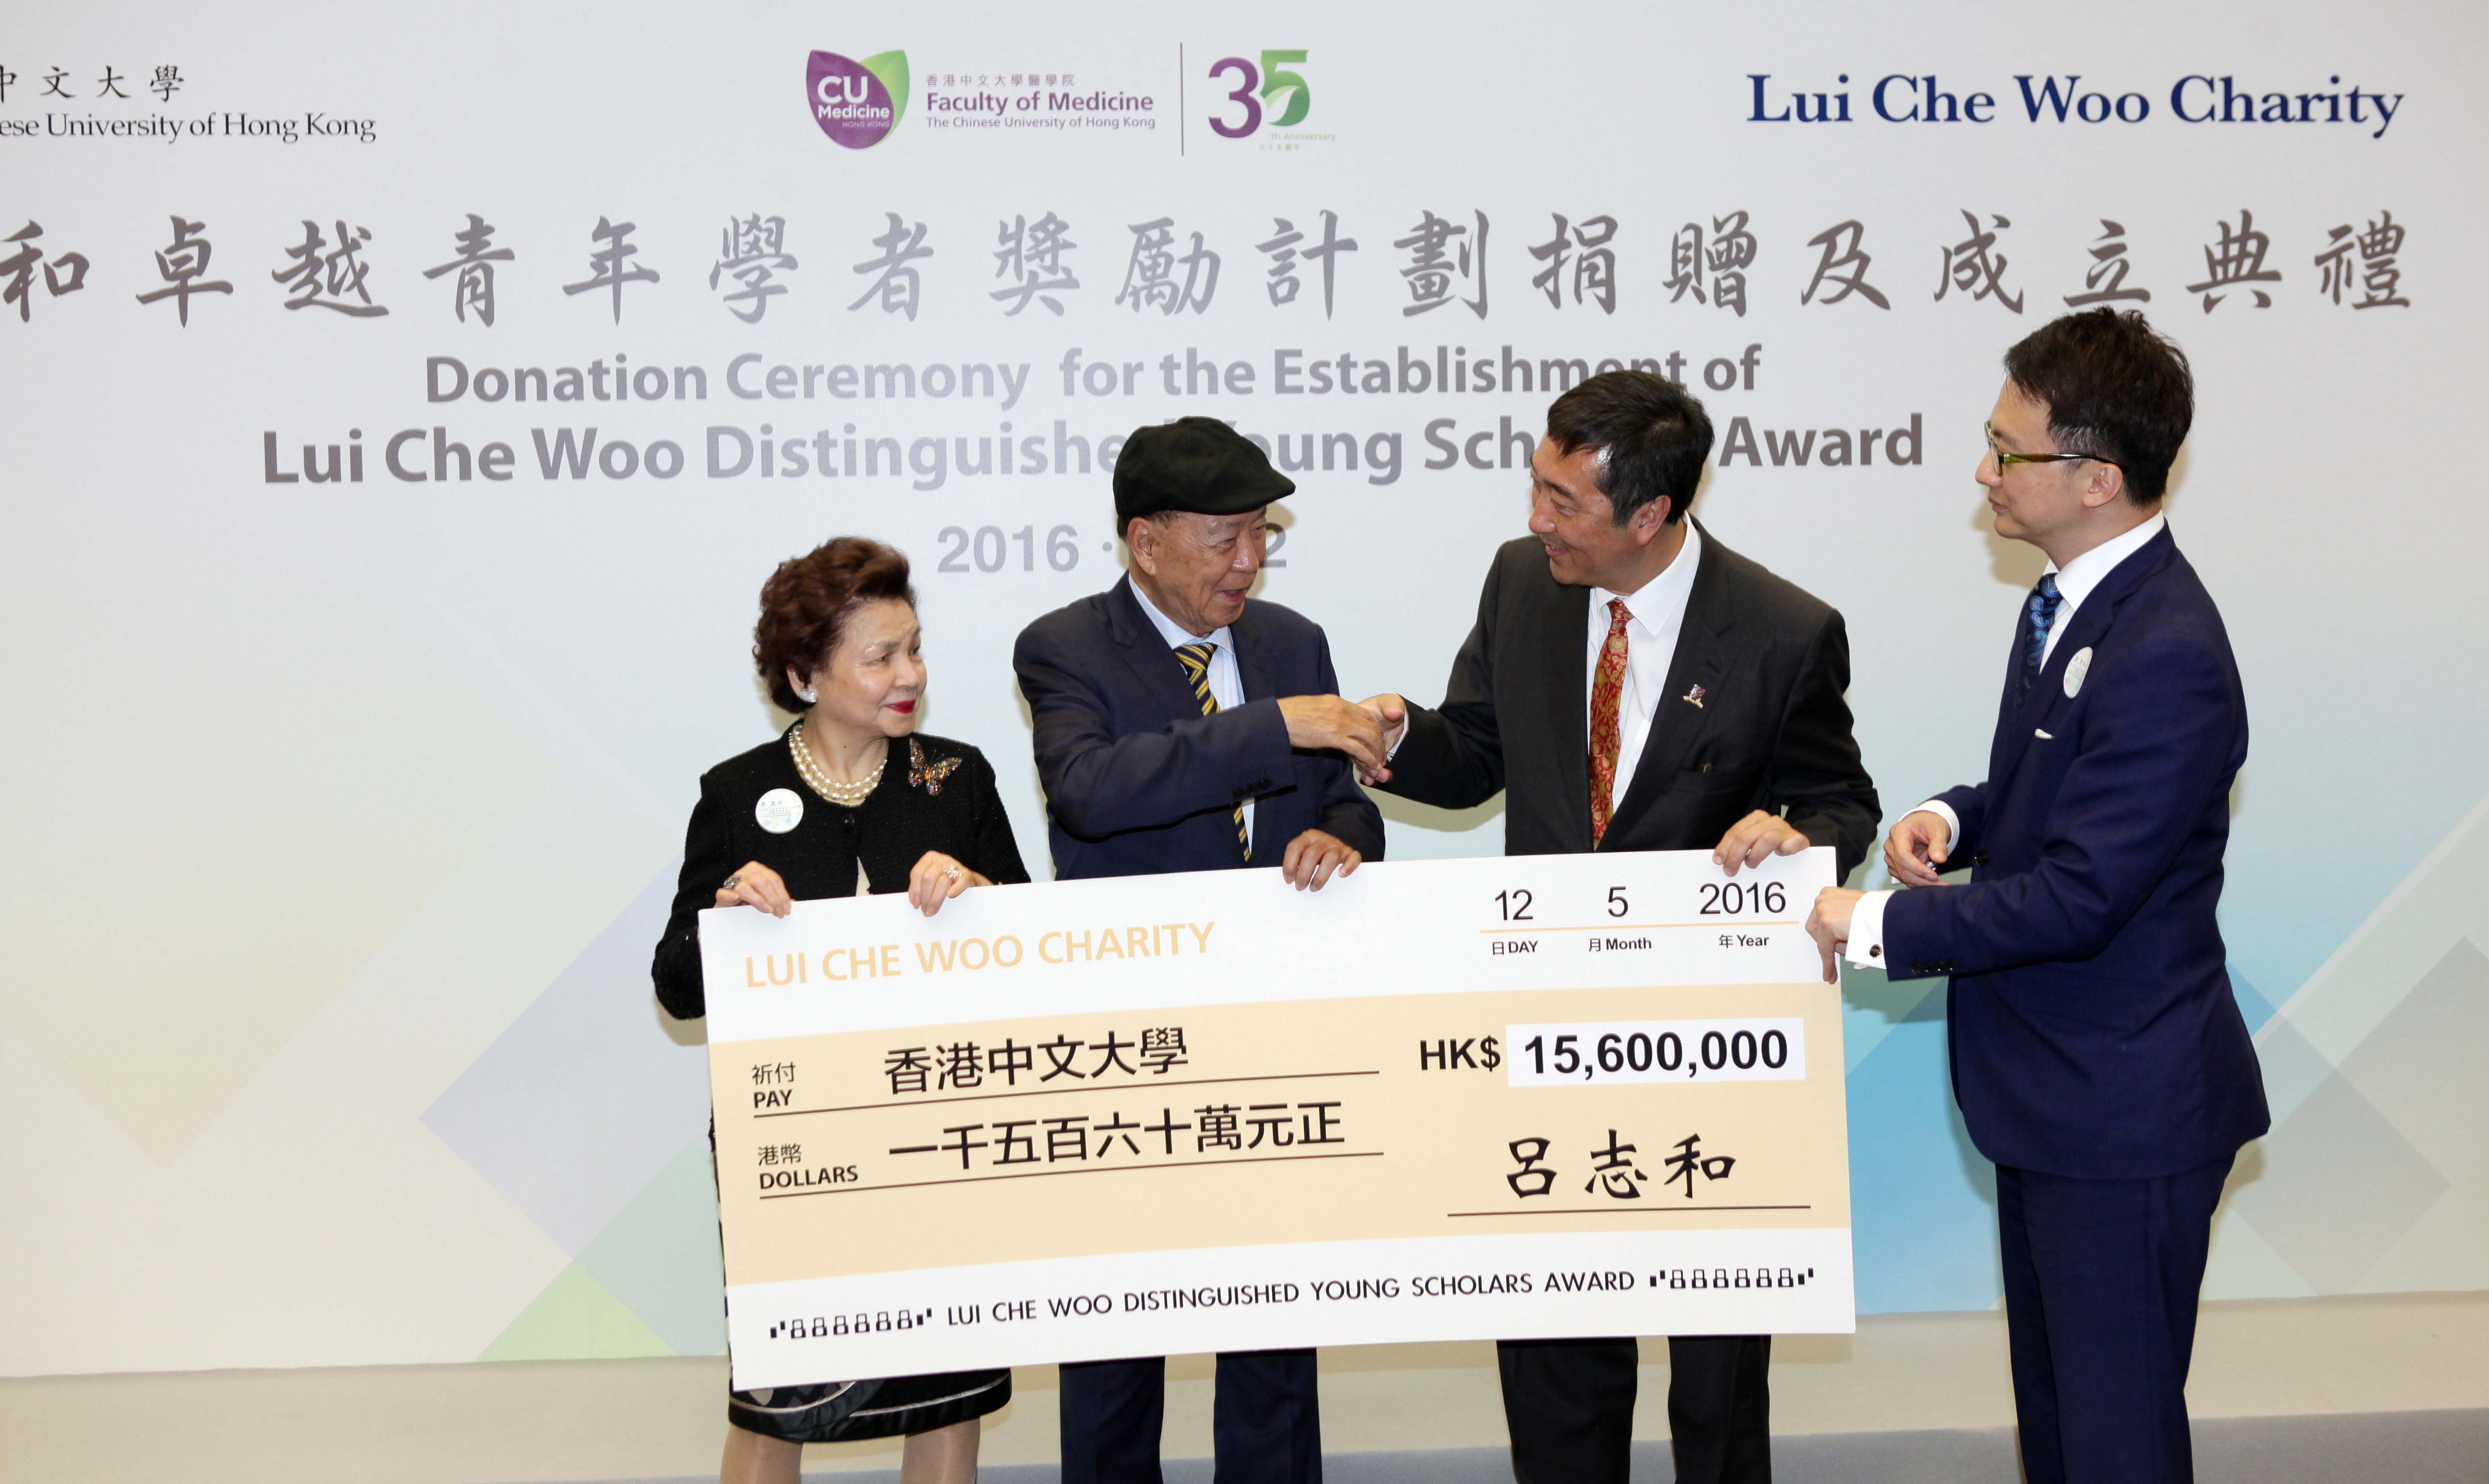 Dr LUI and Mrs. LUI present a cheque worths of HK$ 15.6 million